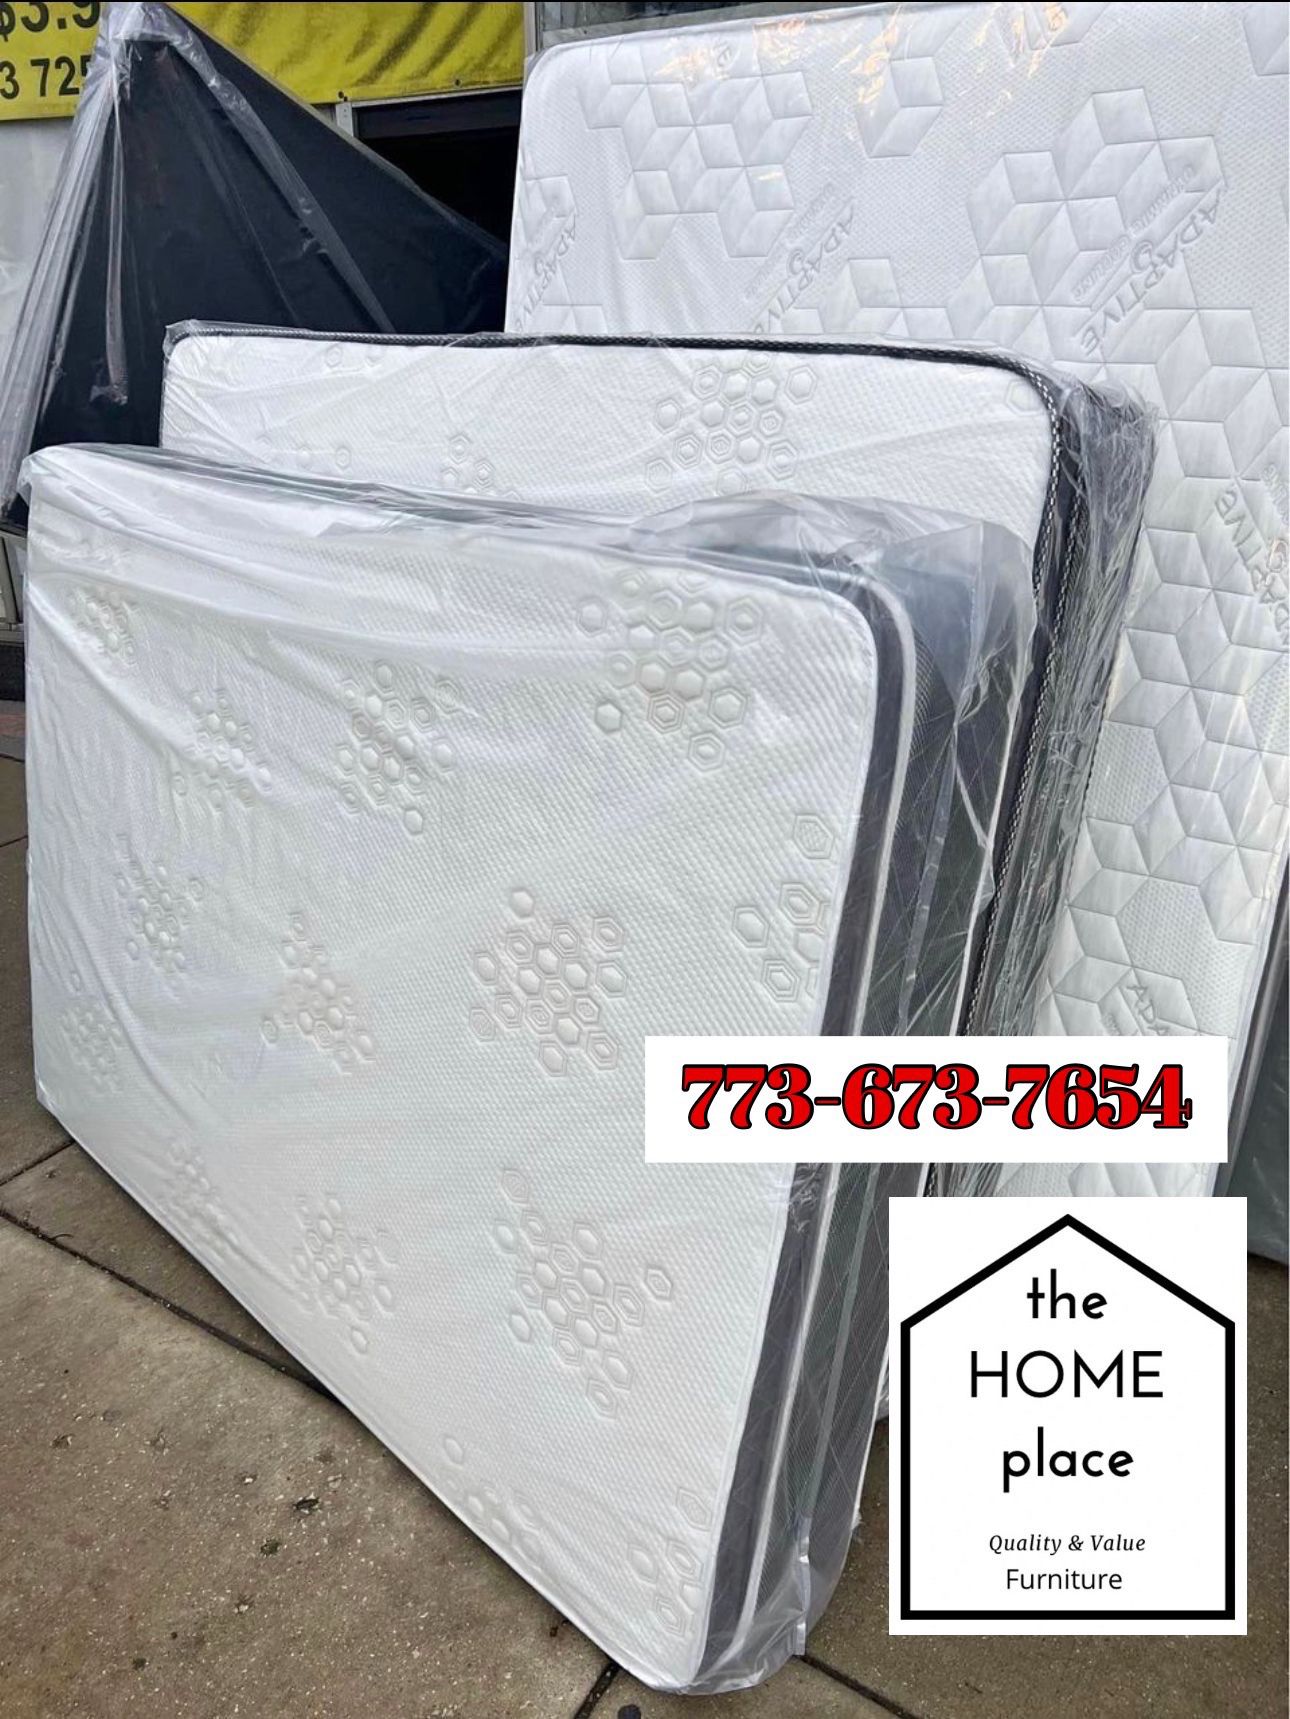 🚨 Top Quality Brand New Mattresses 🚨 Ready for DELIVERY TODAY!!! 🚛